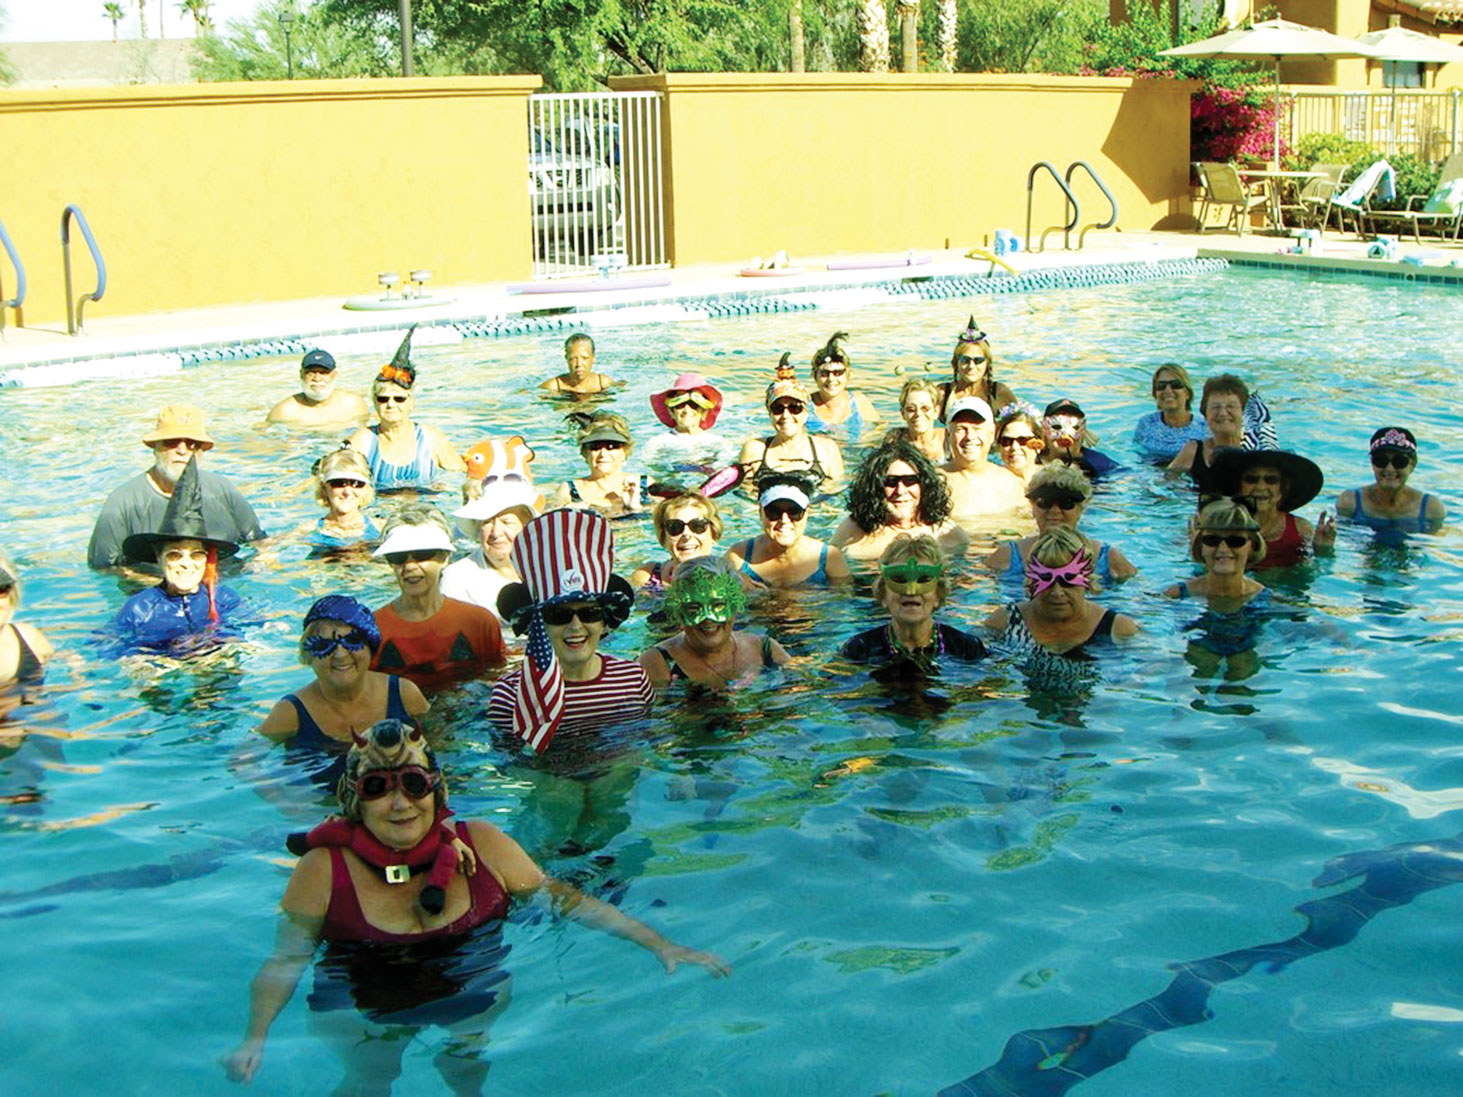 The Water Fitness class celebrated Halloween by dressing in waterproof masks and hats.